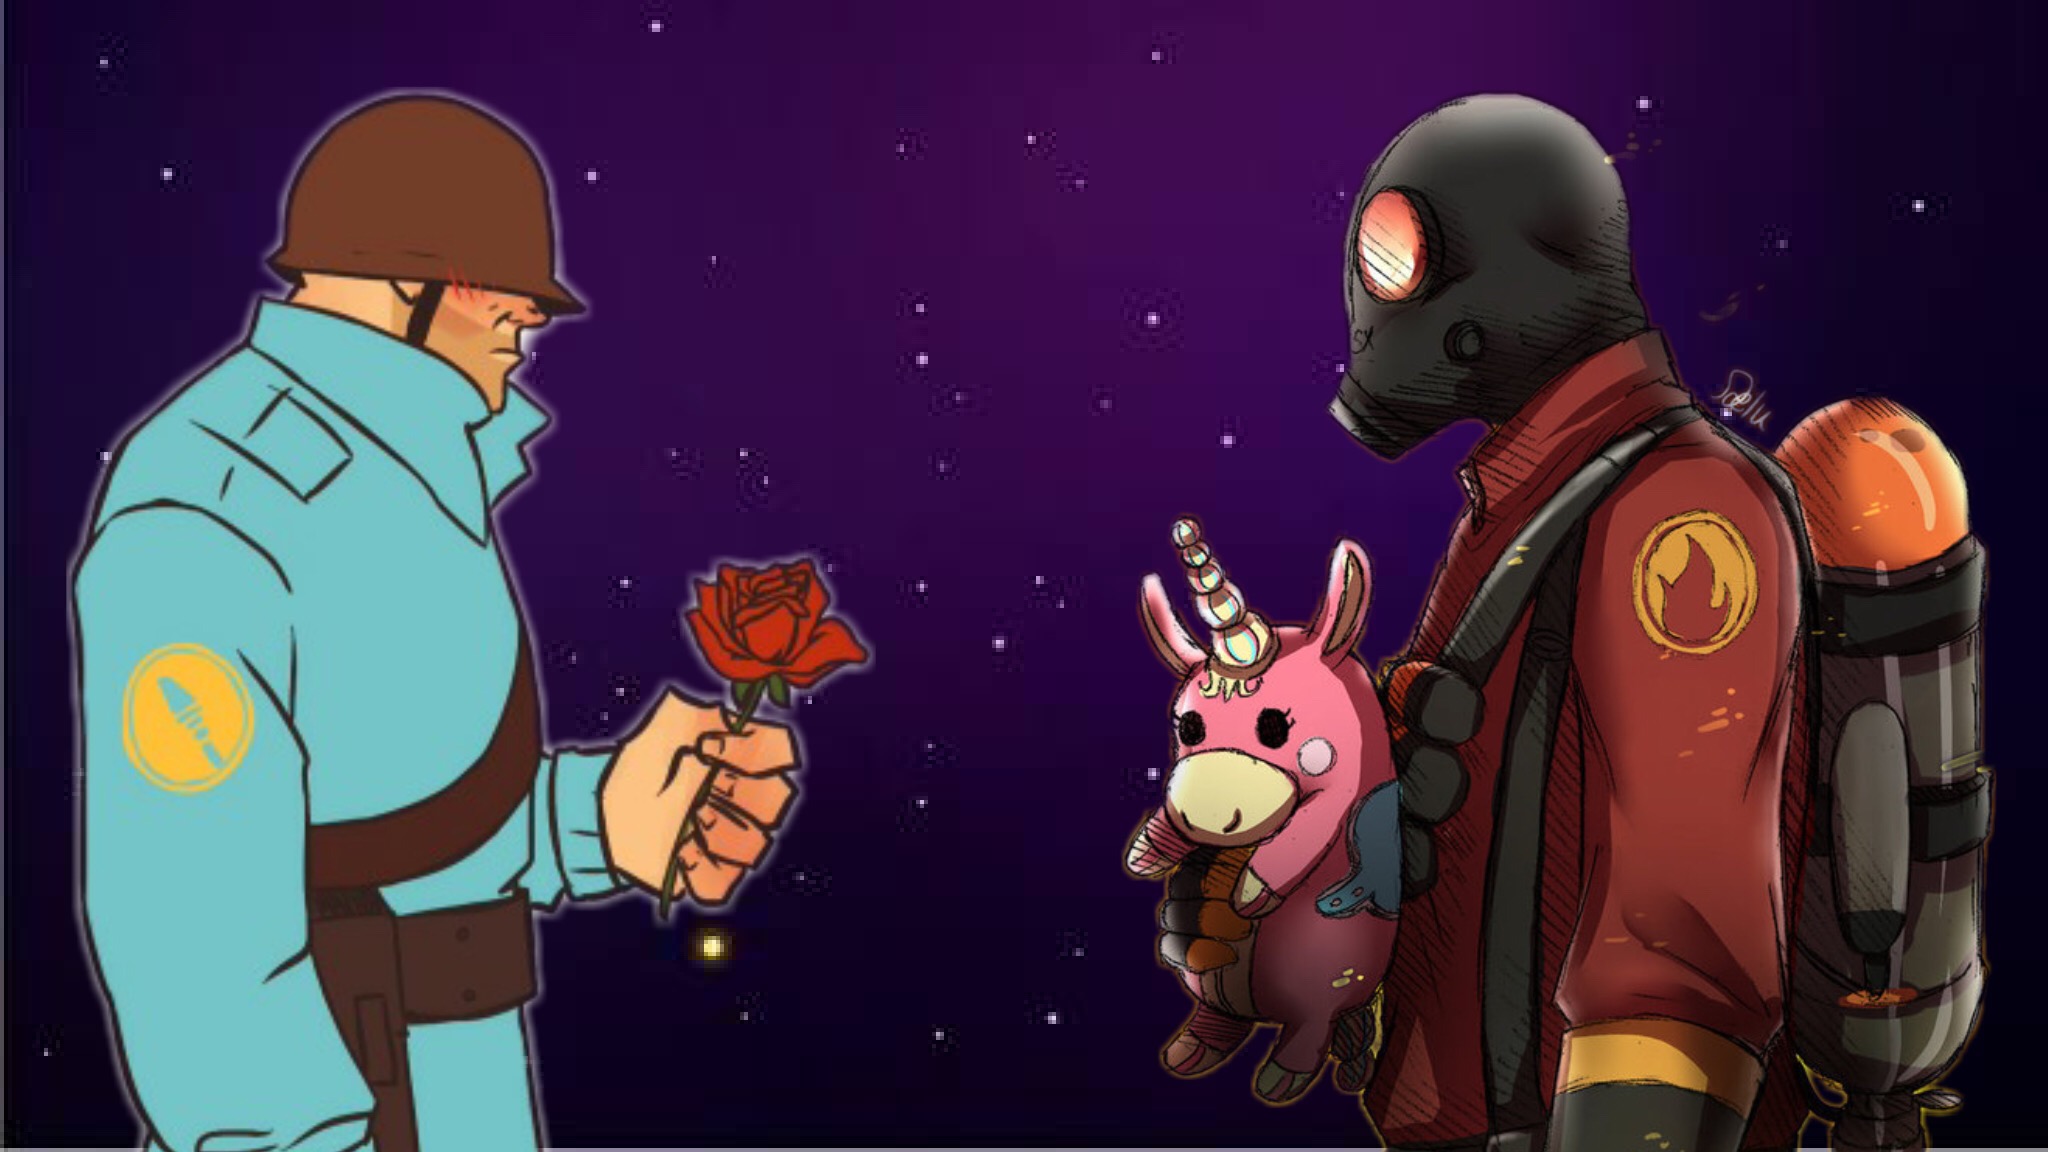 tf2soldier tf2pyro tf2 #tf2soldier image by @mateyalien.